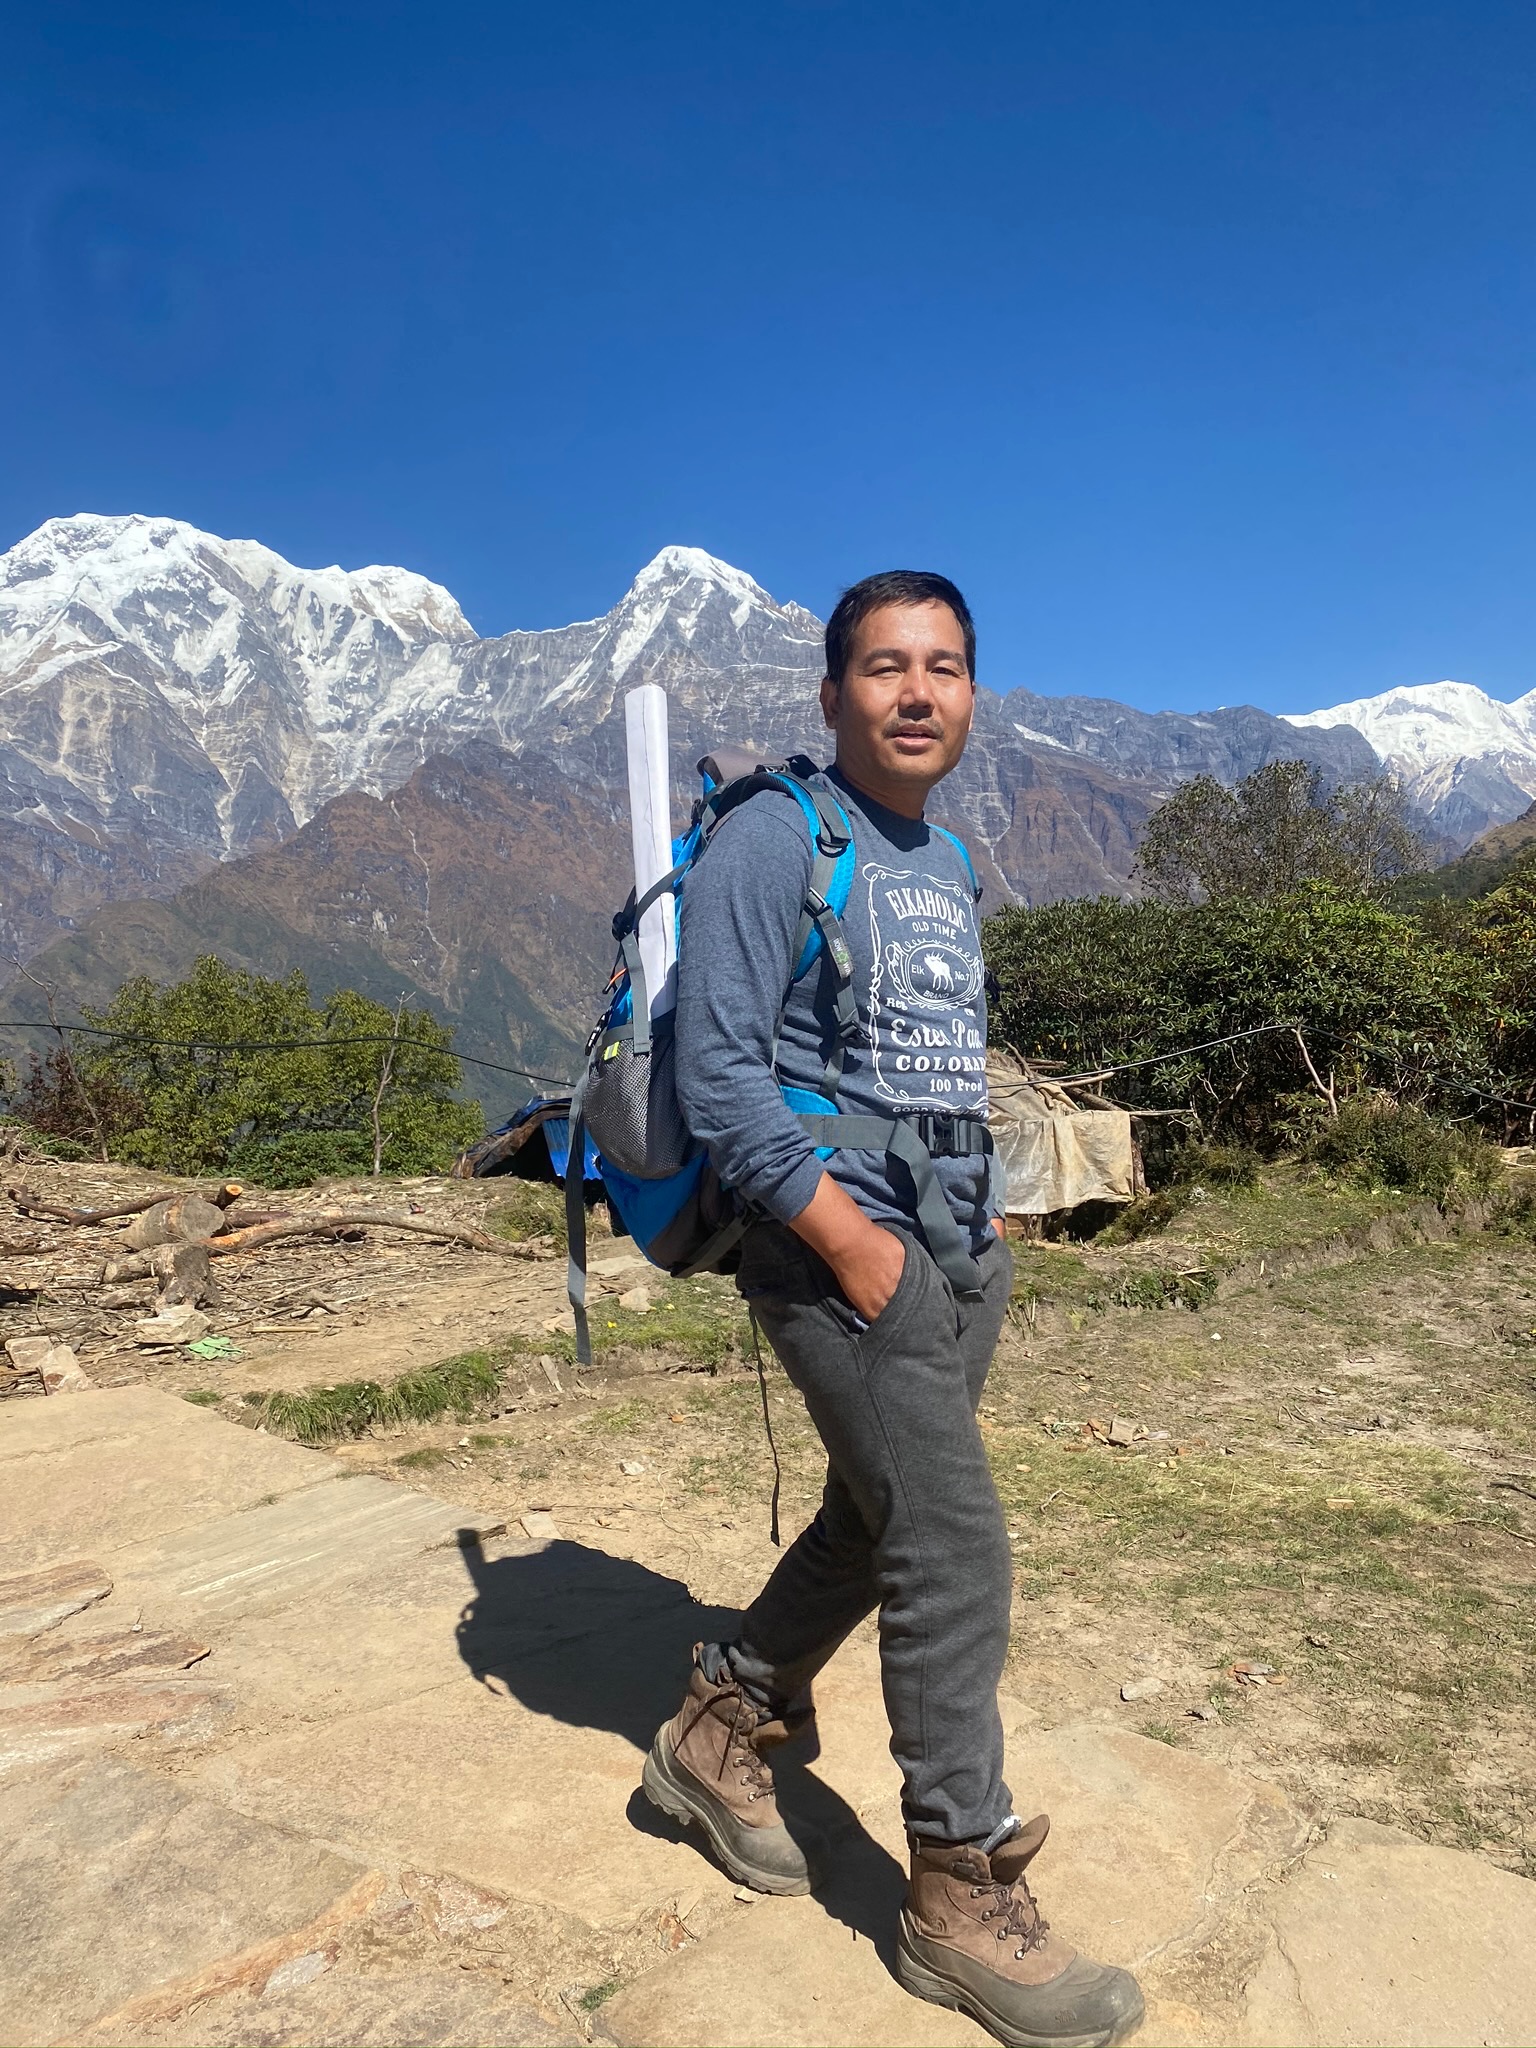 Who is Trekking Guide 